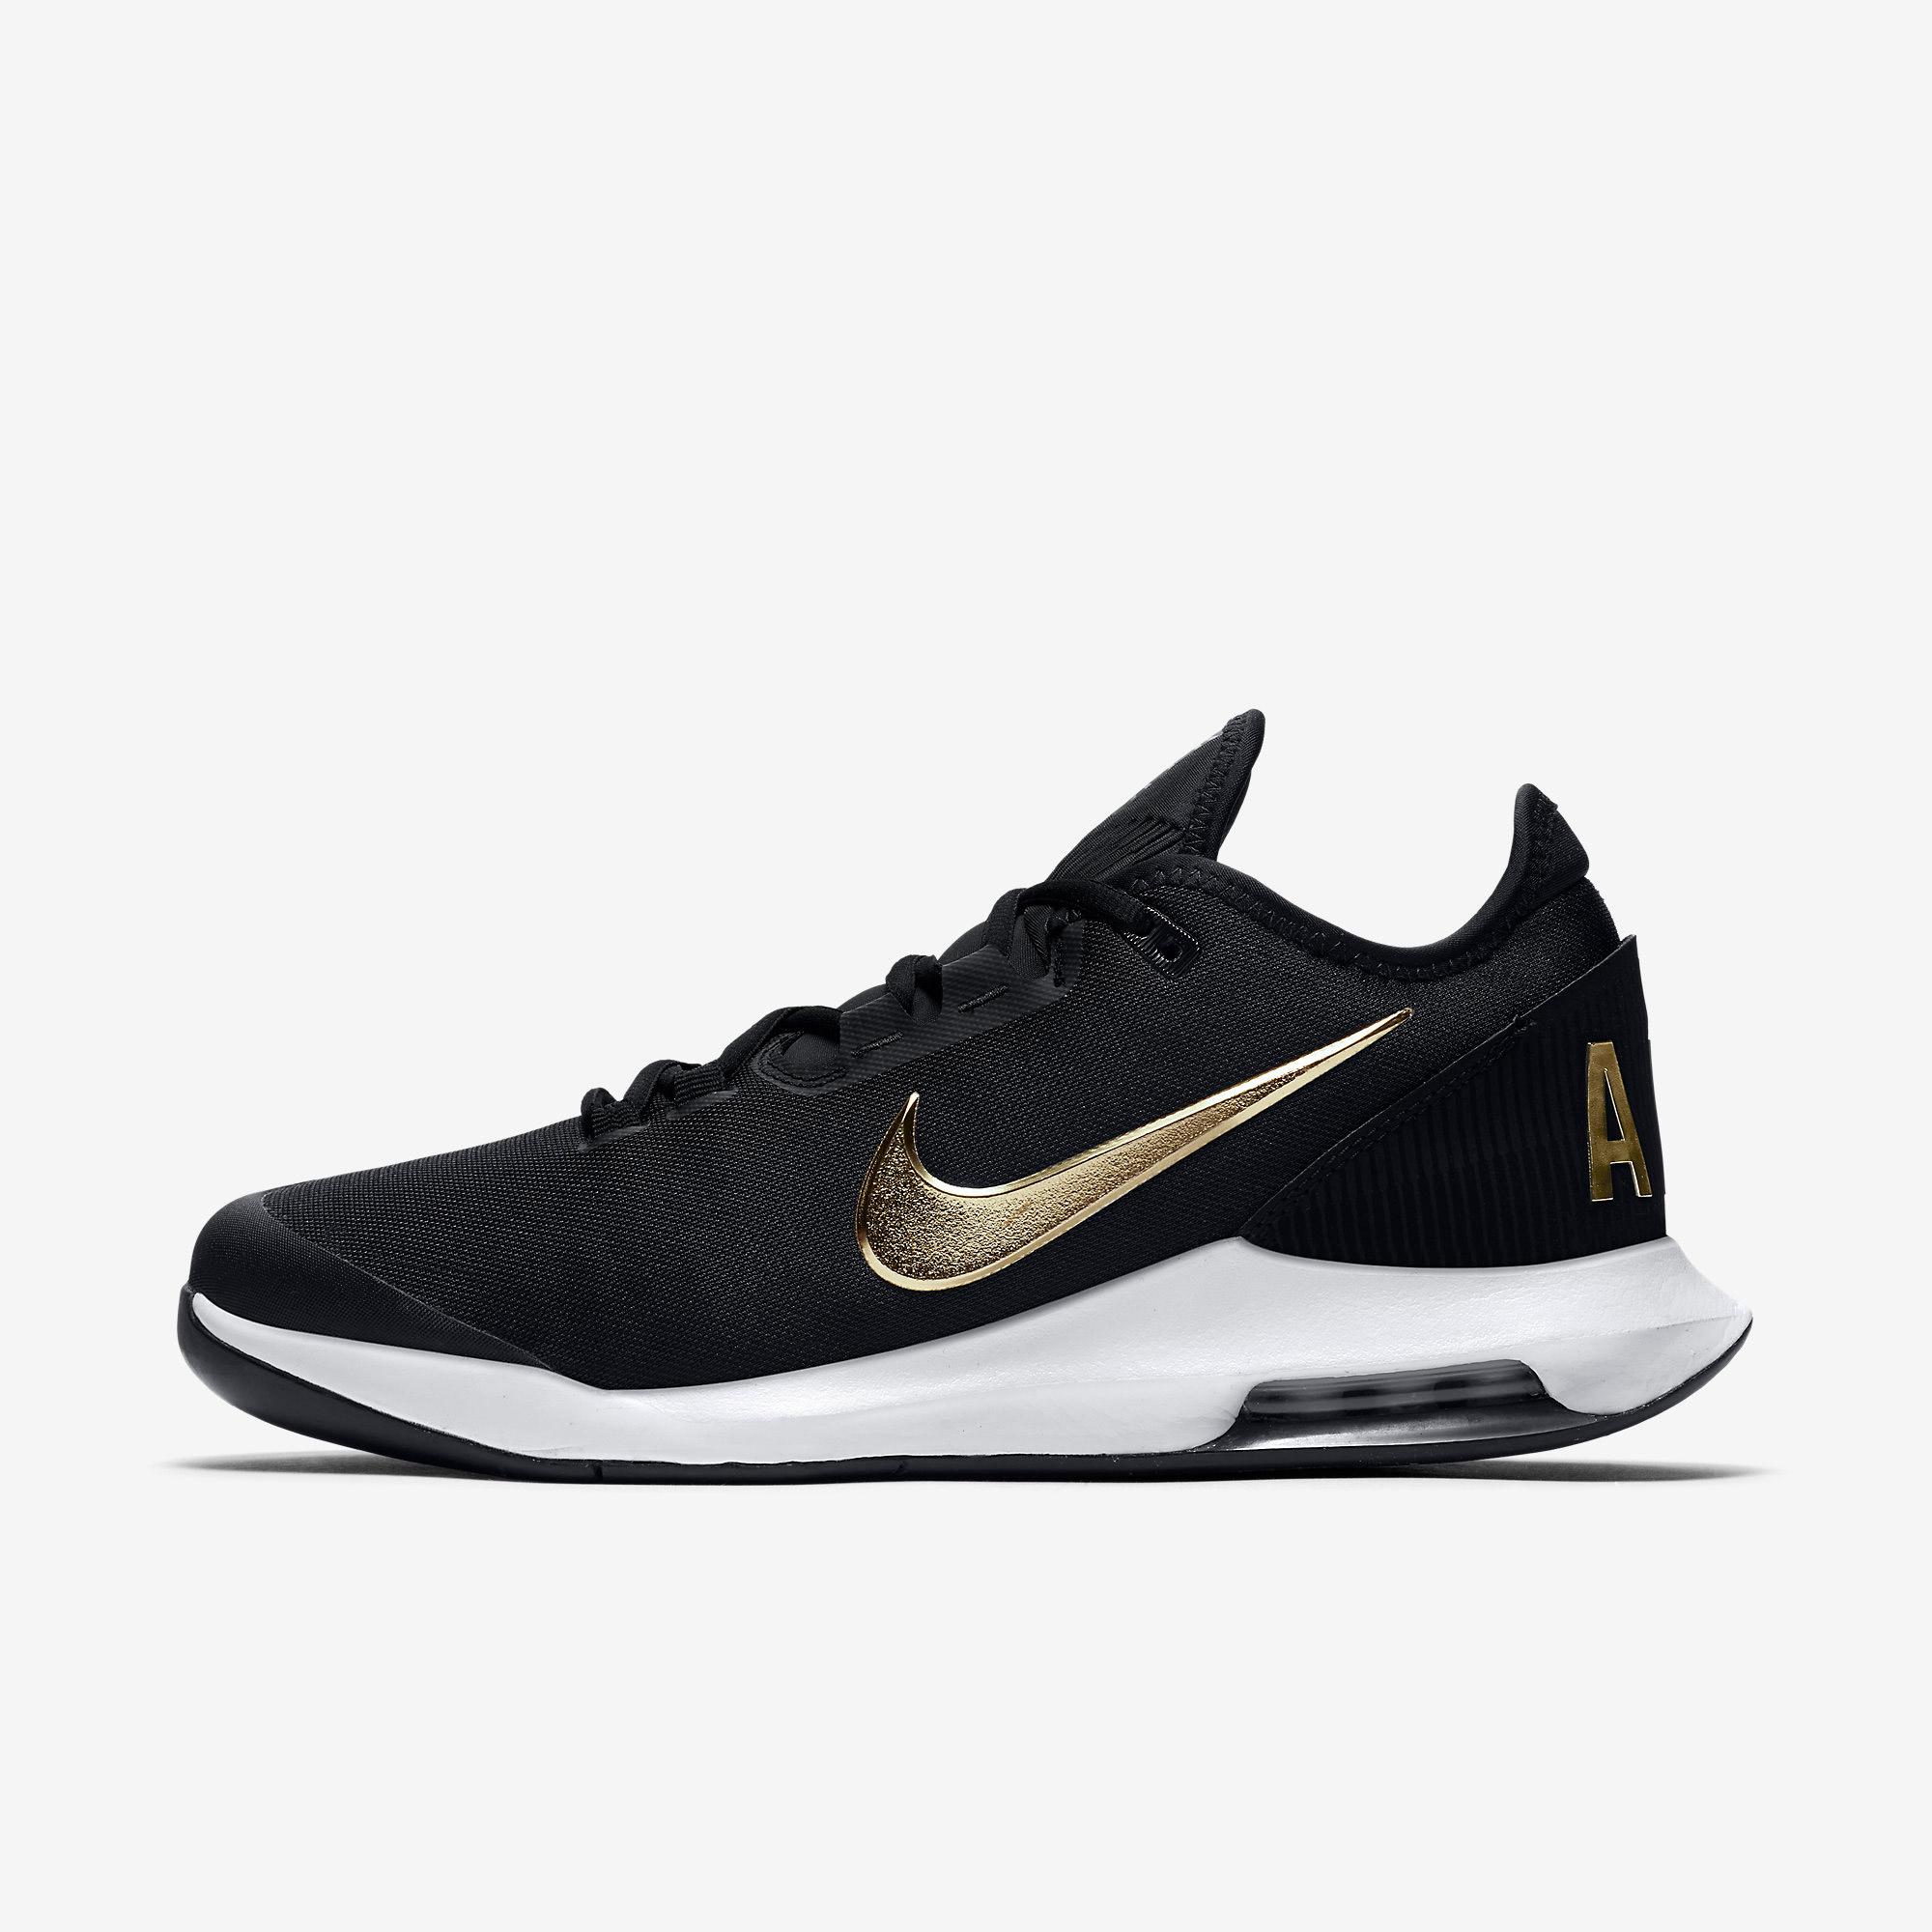 black and gold mens tennis shoes